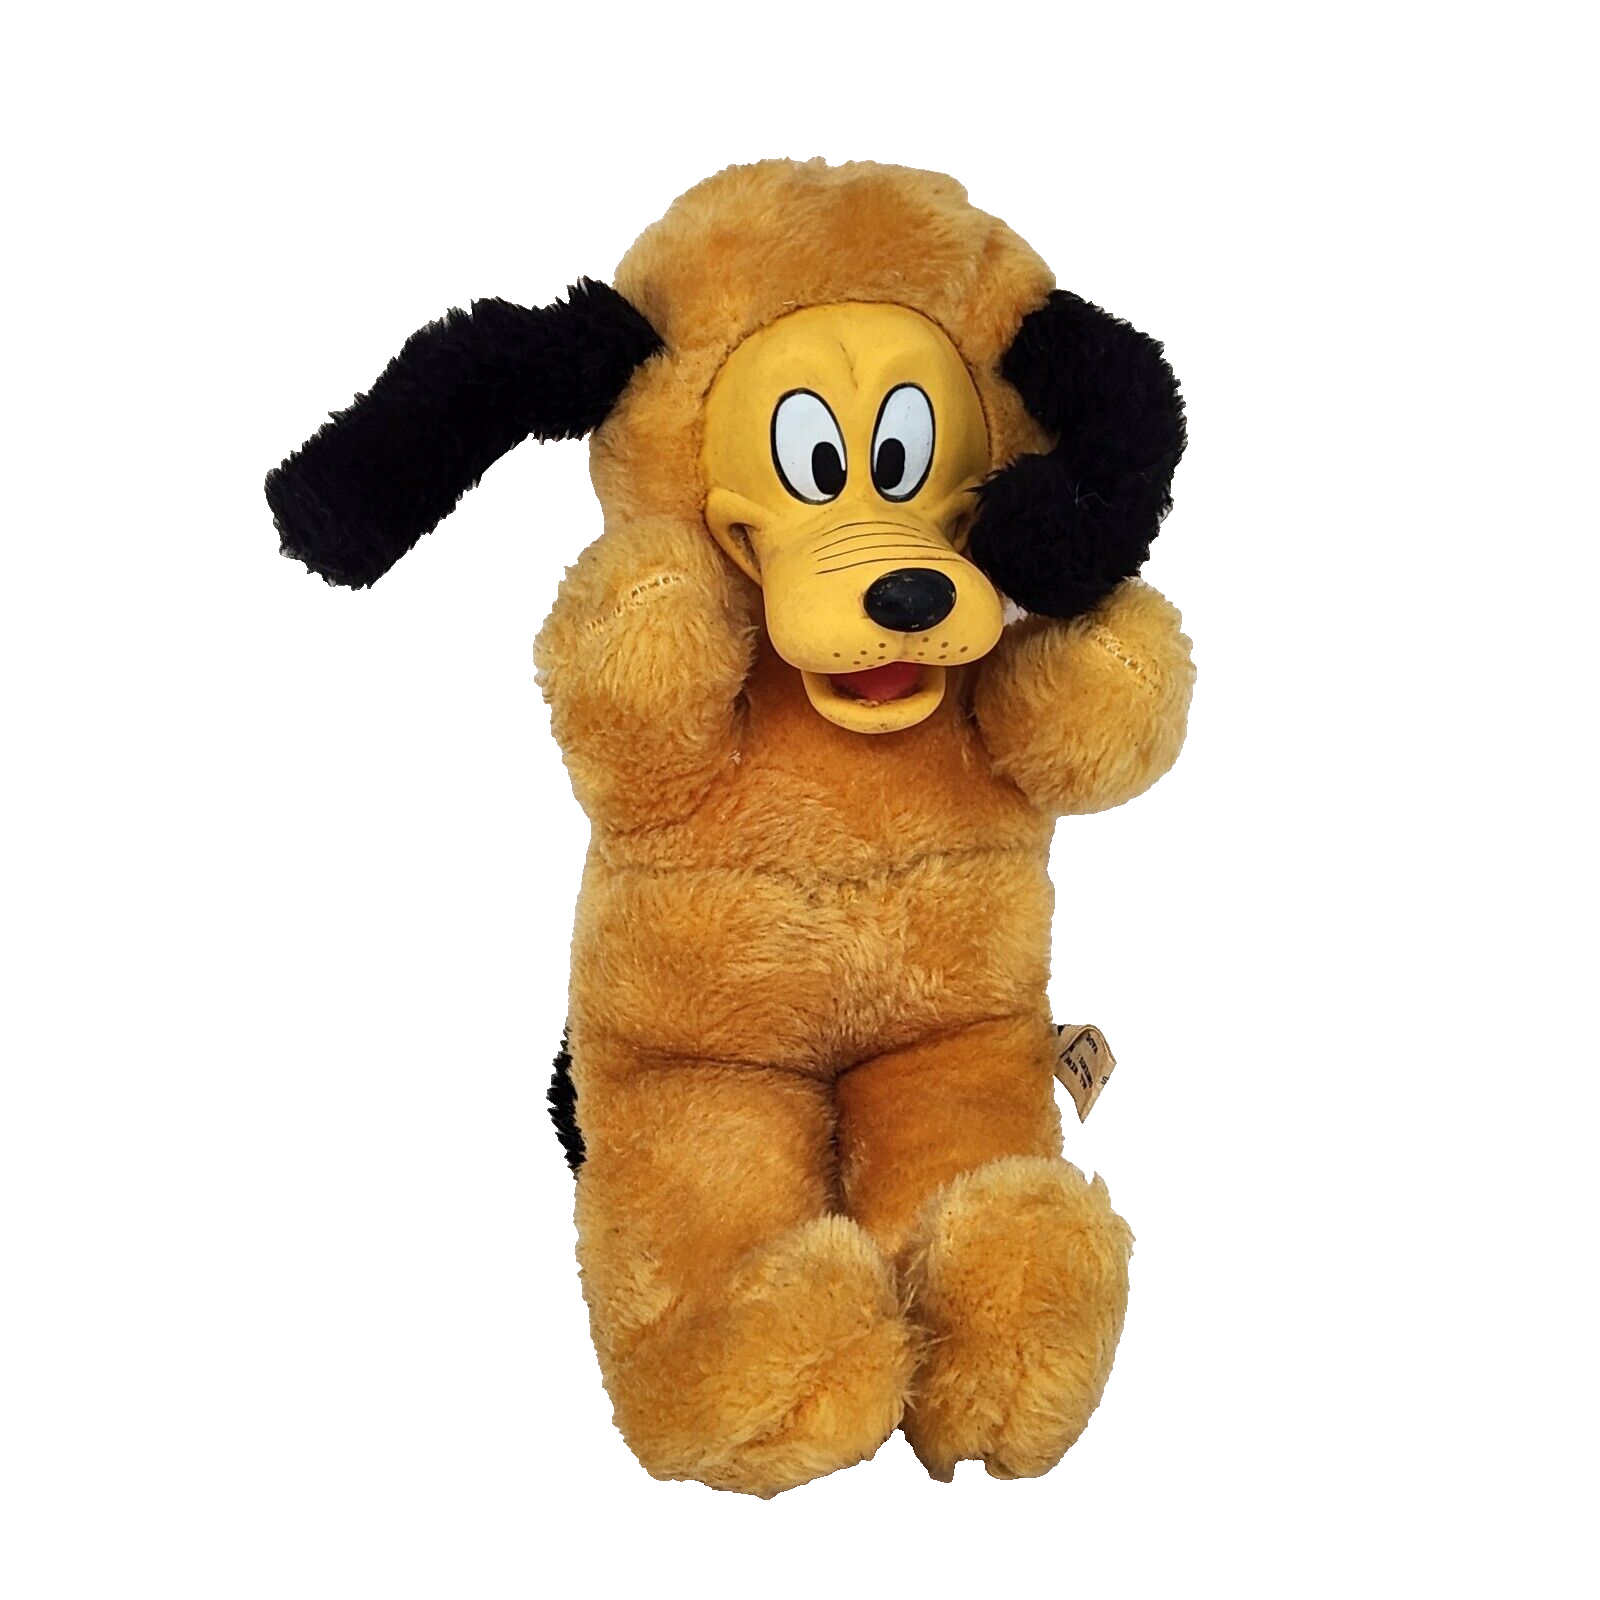 Primary image for 12" VINTAGE DISNEY RUBBER FACE PLUTO PUPPY DOG STUFFED ANIMAL PLUSH TOY JAPAN